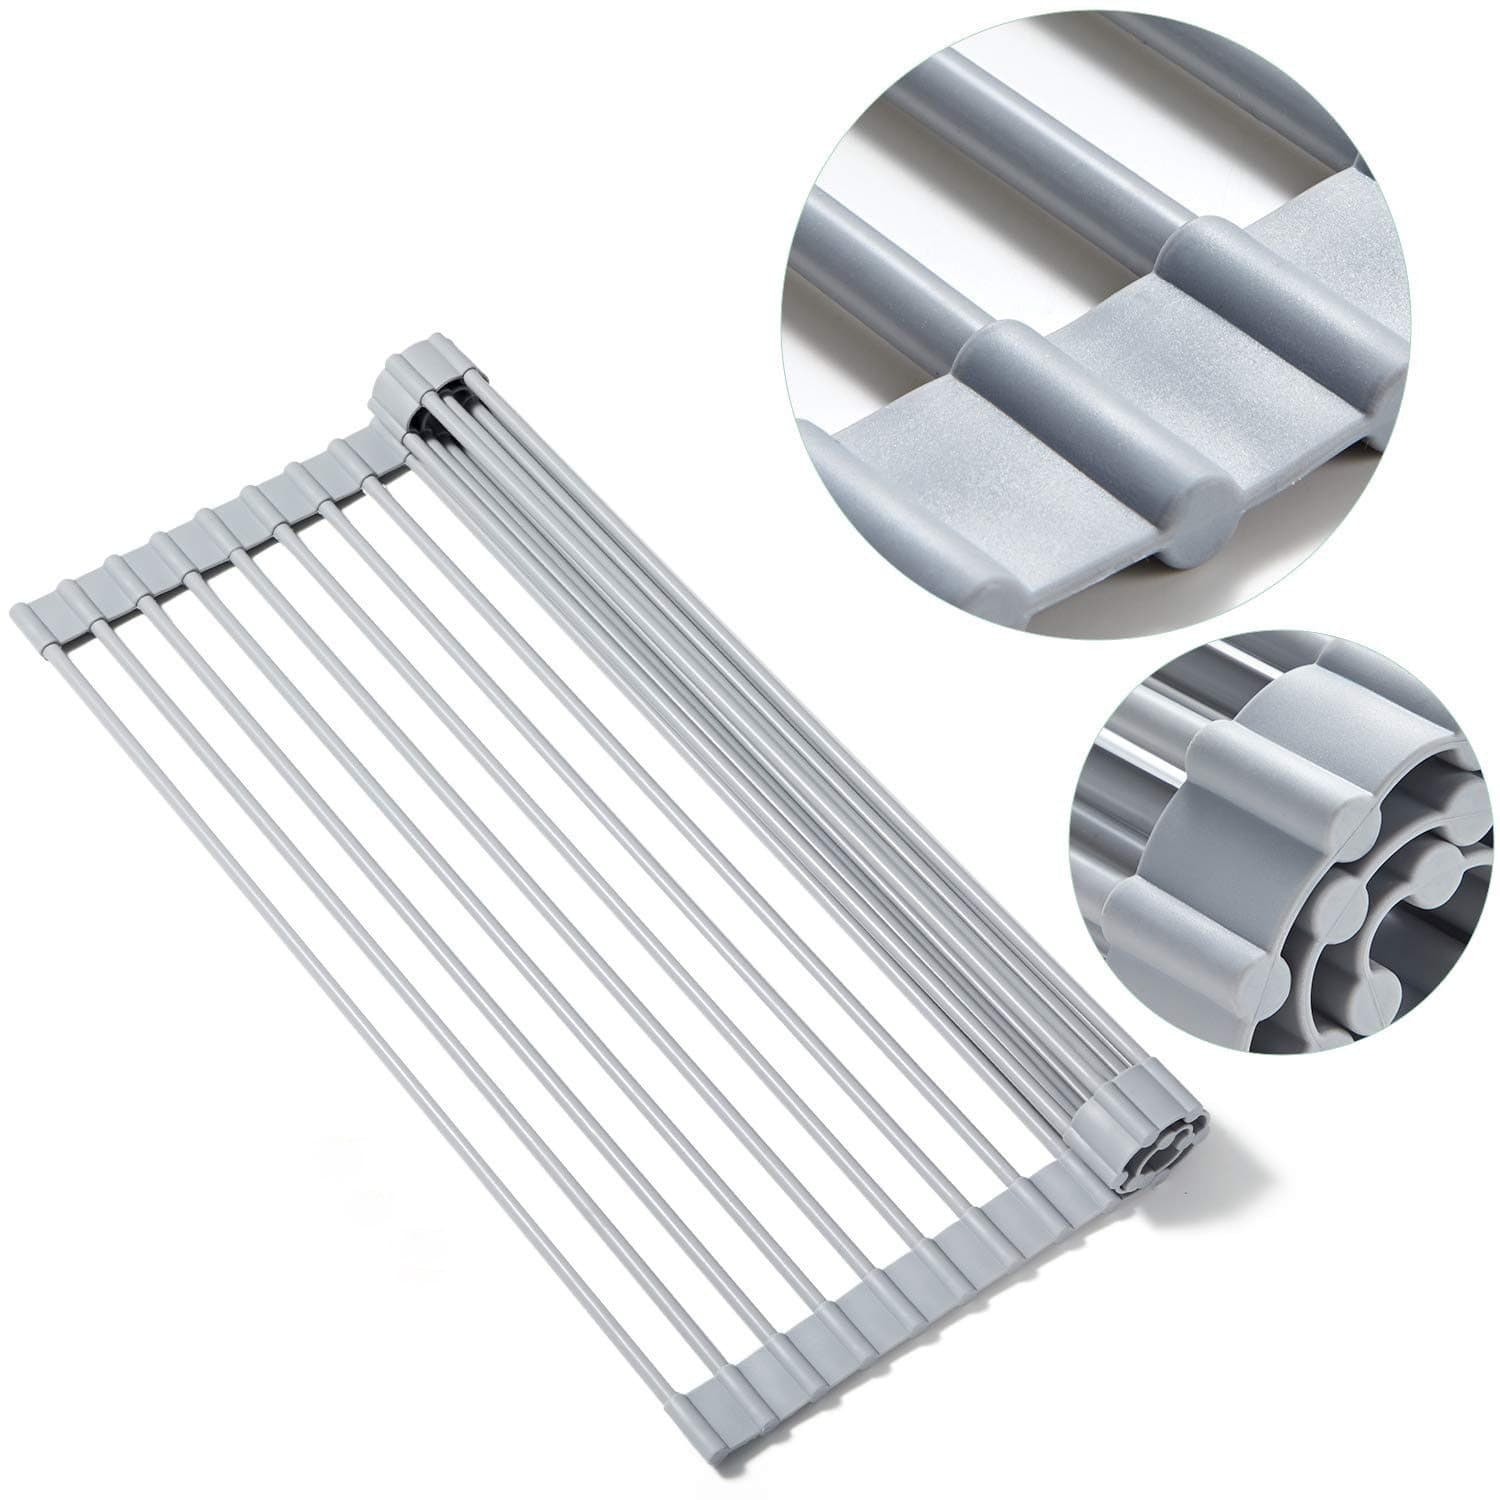 XL Dish Rack Drying Drainer Over Sink Stainless Steel Folding Roll